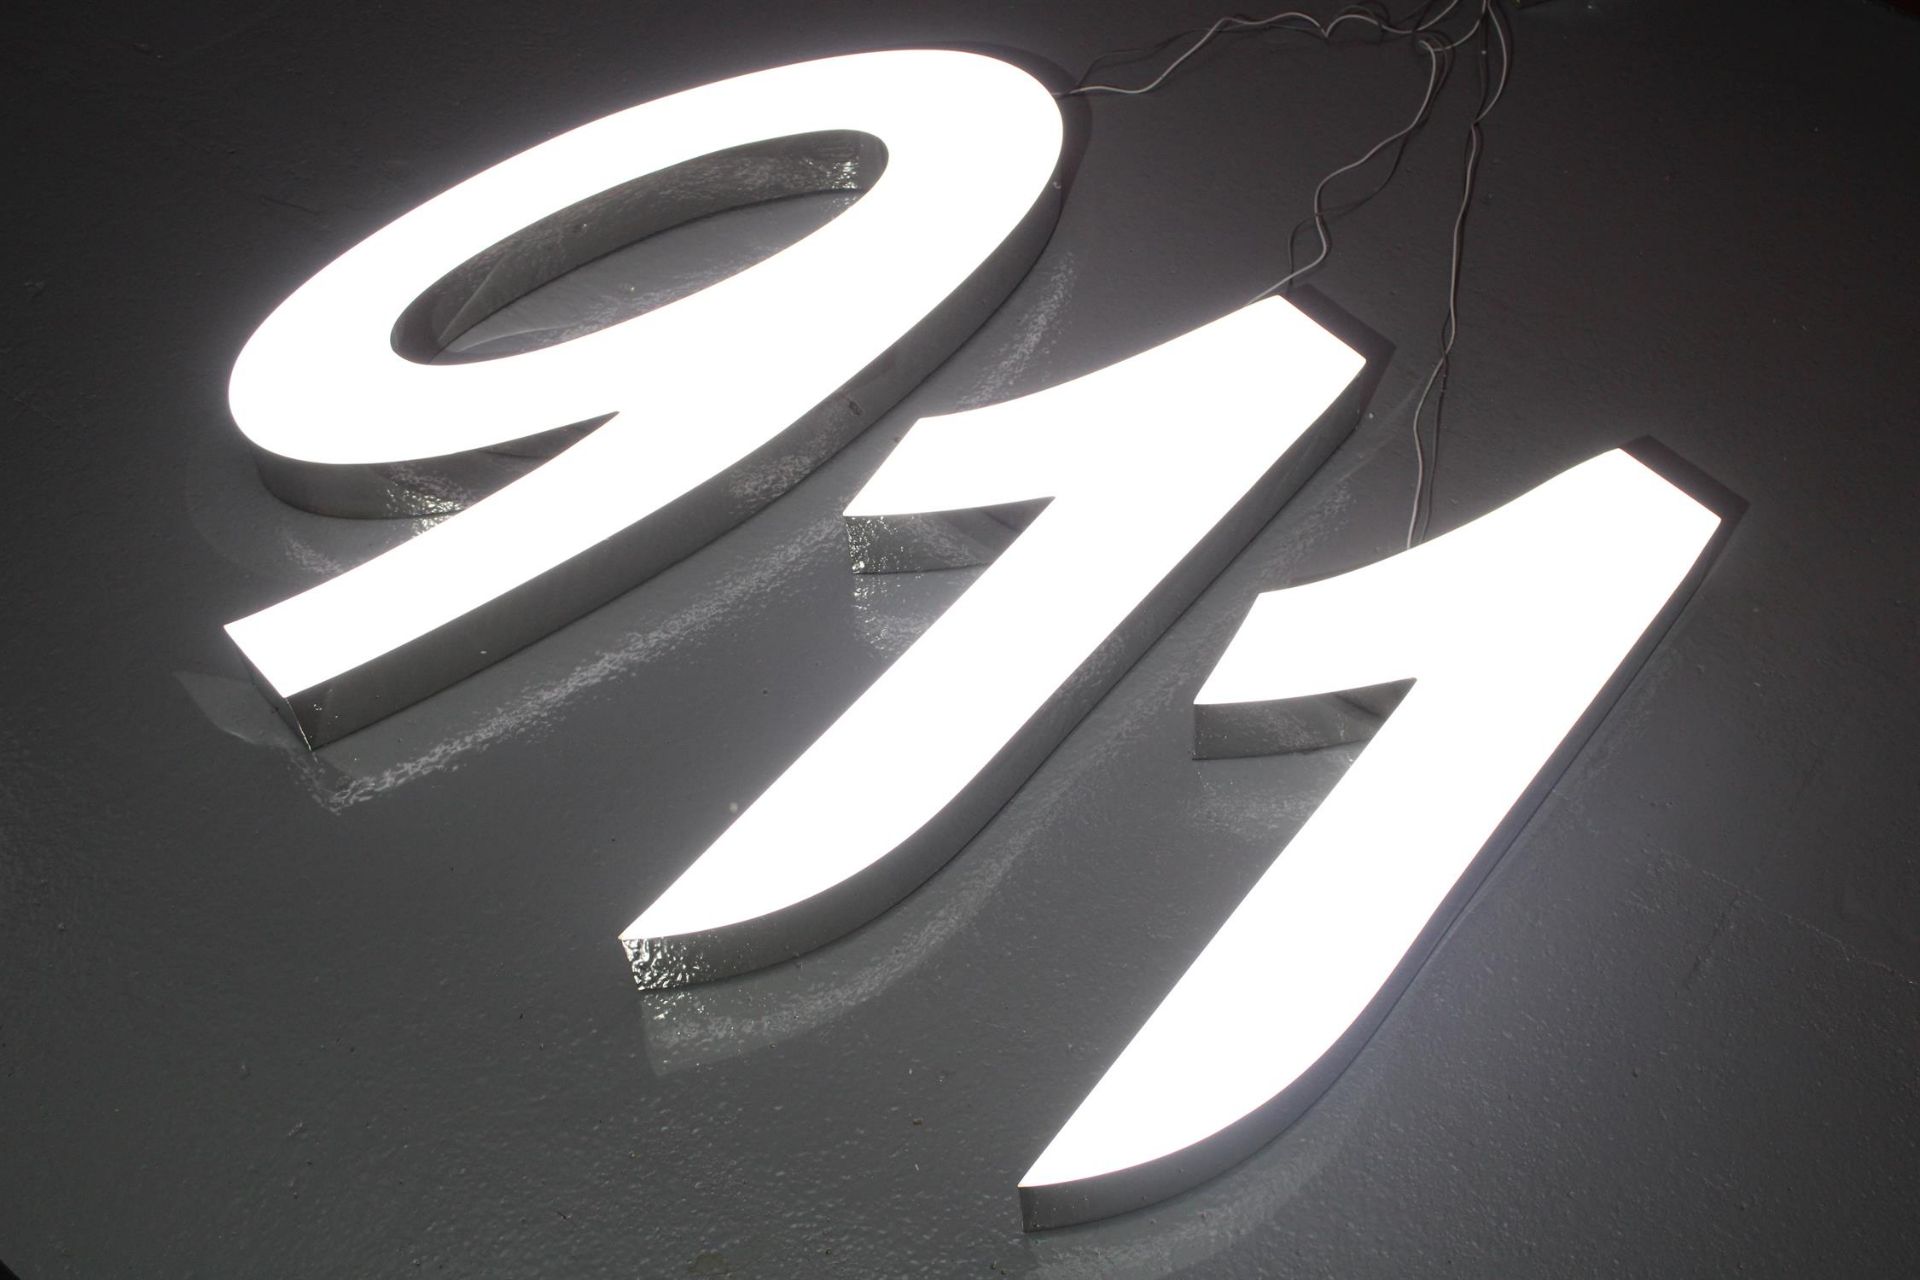 A large Illuminated Sign in the Style of the Porsche Number 911 - Image 8 of 10